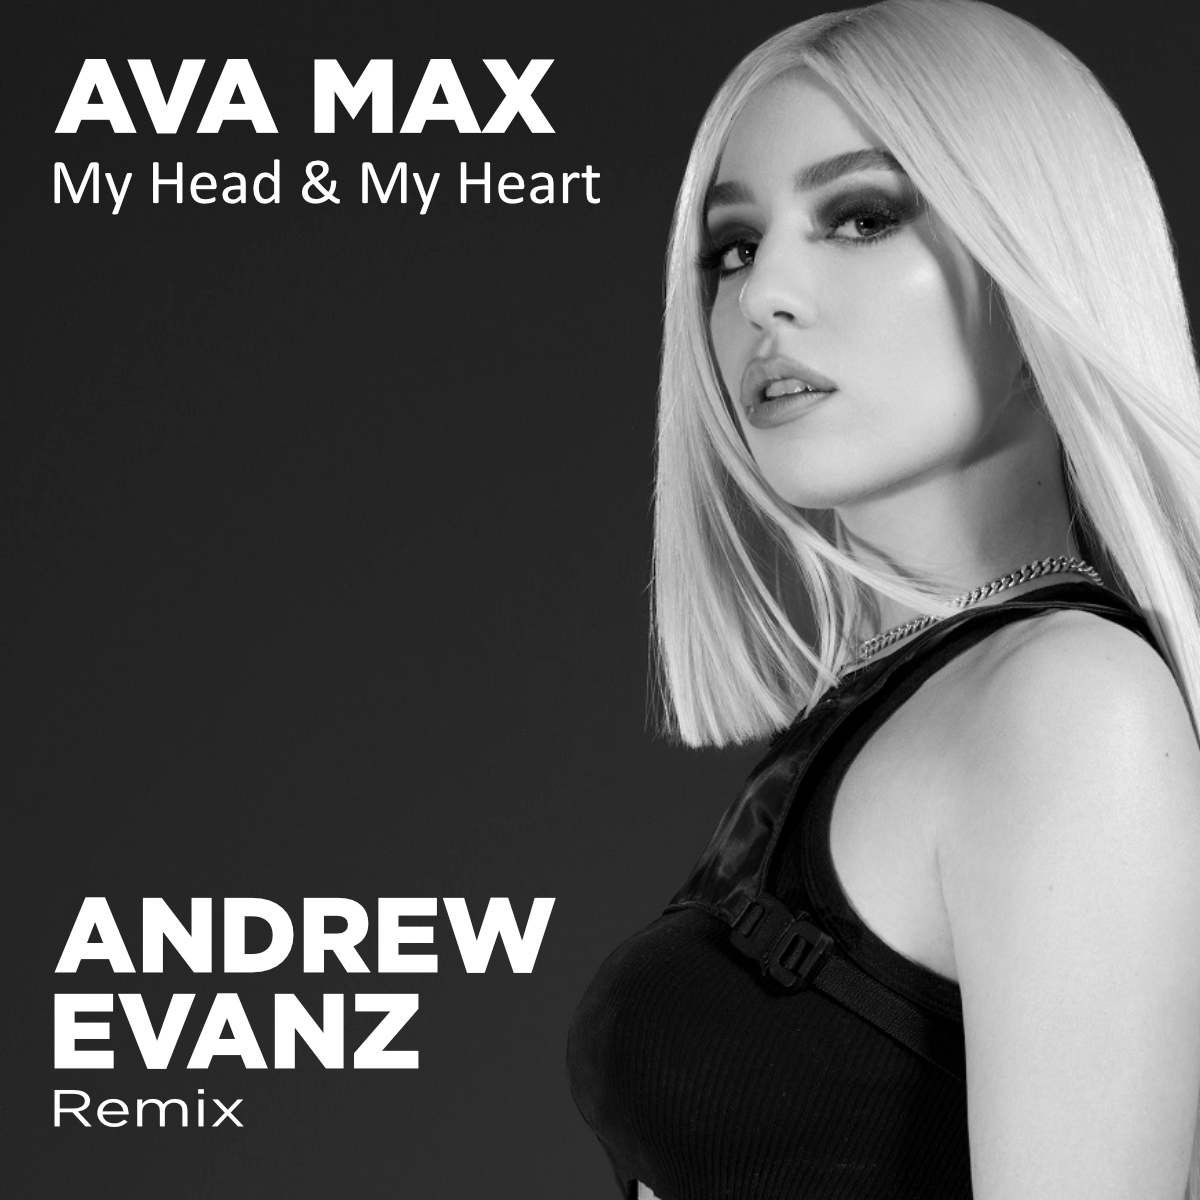 Ava Max - My Head & My Heart [Official Music Video] 